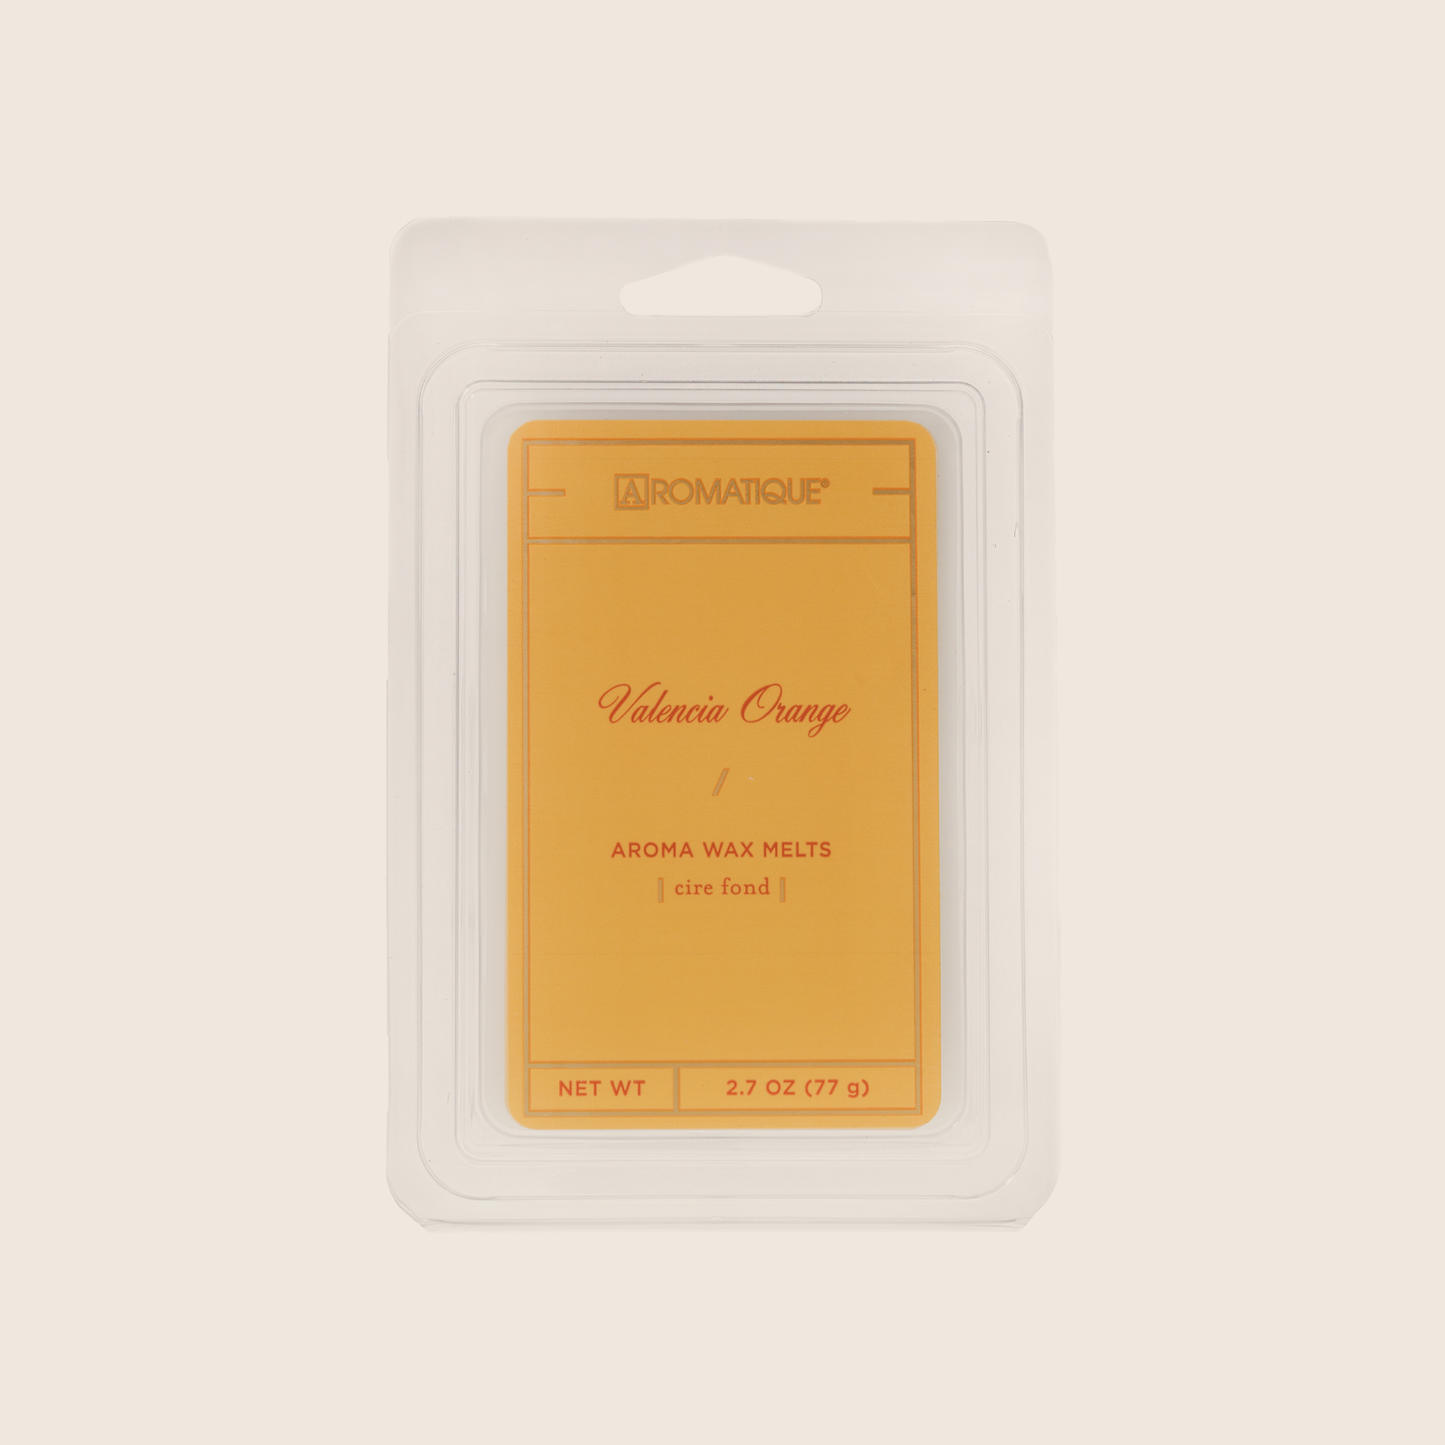 Load image into Gallery viewer, Valencia Orange Aroma Wax Melts transform a room with the fragrance of sweet oranges mixed with notes of apples and red berries with a hint of citrus peel. Aromatique Wax Melts are a set of 8 cubes that contain 100% food-grade paraffin wax and a highly fragrant aroma - no wicks or flames needed. 
